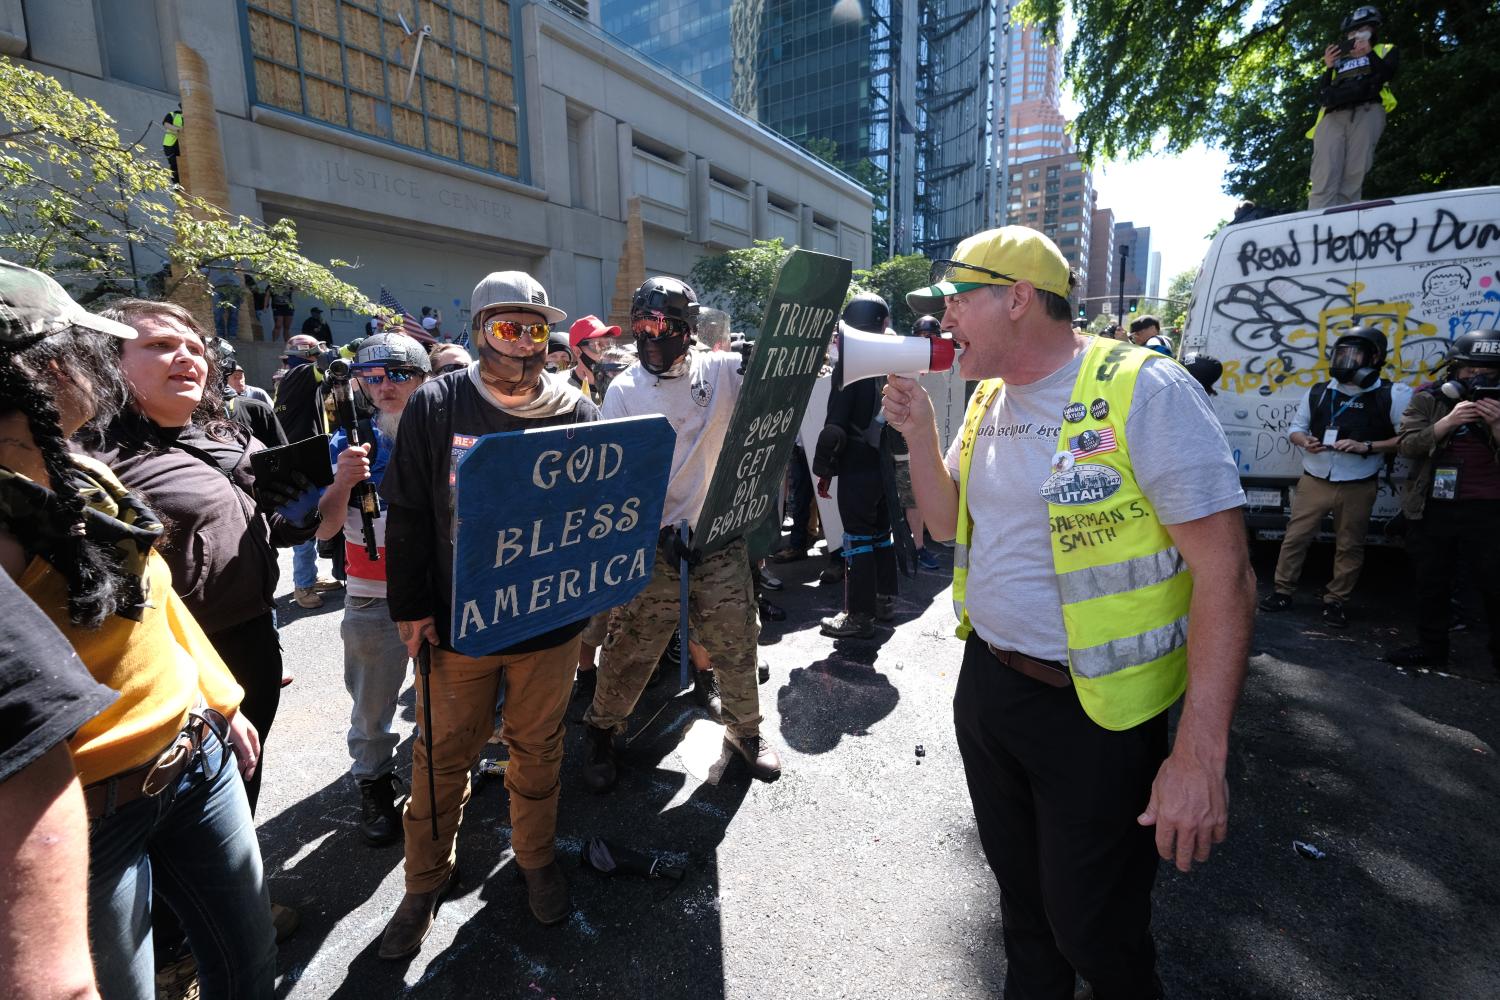 A man confronts Trump supporters with a contingent of far-right sympathizers as they rally in the street outside the Justice Center in Portland, Ore., on August 22, 2020. (Photo by Alex Milan Tracy/Sipa USA)No Use UK. No Use Germany.